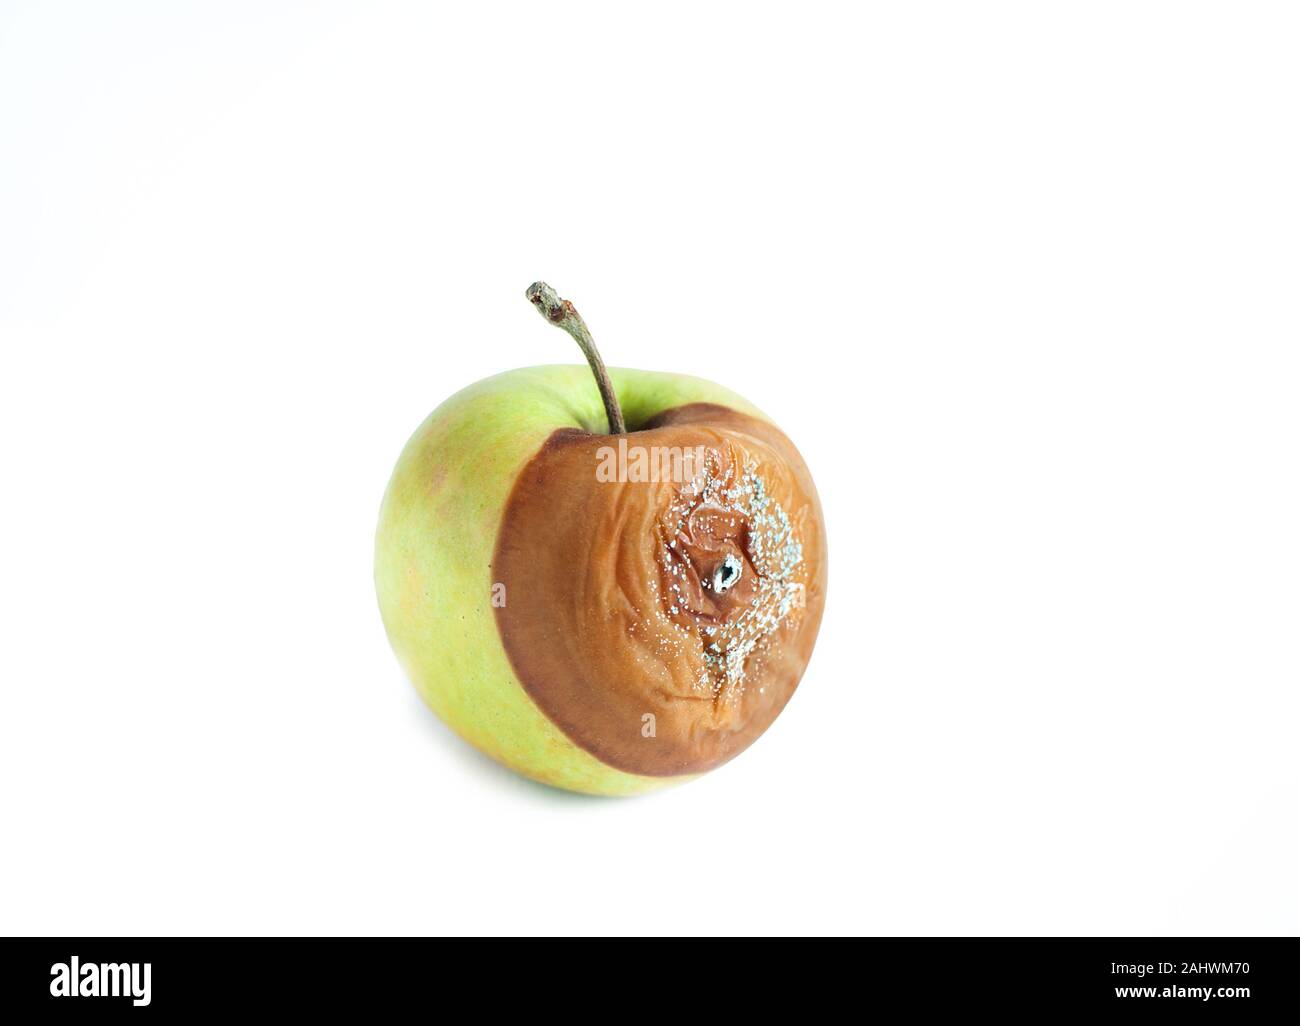 Ugly rotten green apple isolated on white background. Copy space Stock Photo